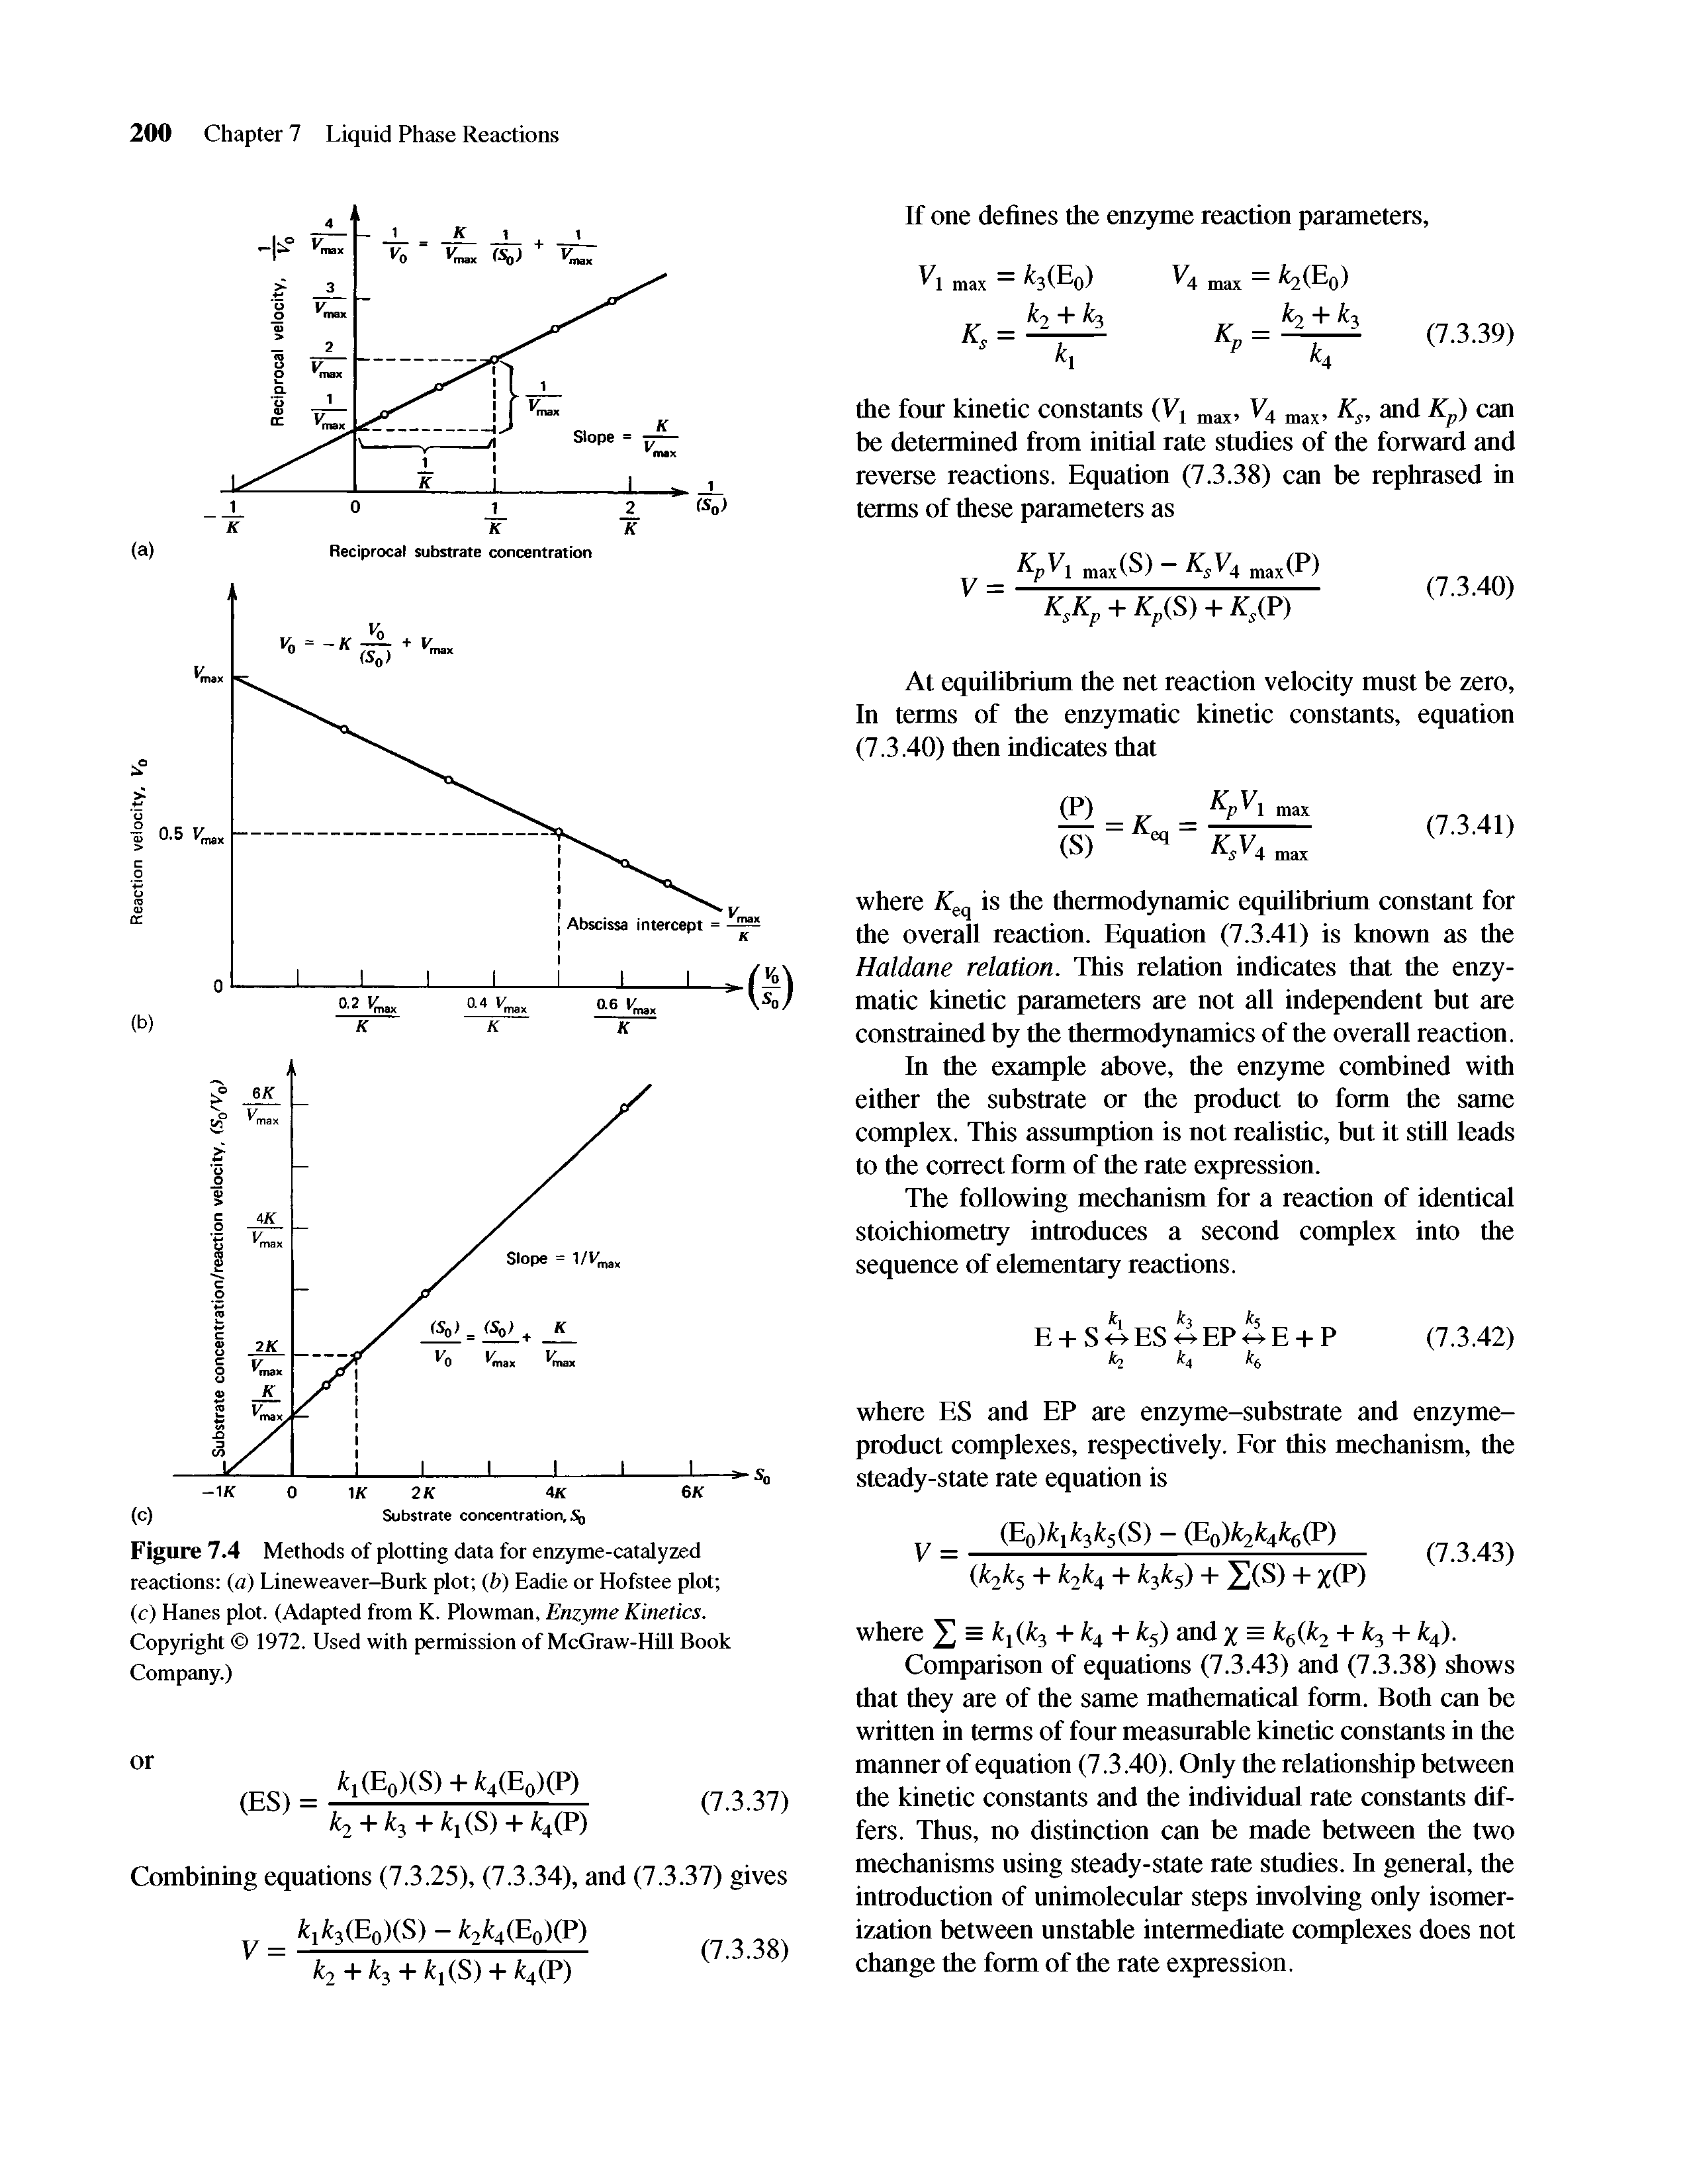 Figure 7.4 Methods of plotting data for enzyme-catalyzed reactions (a) Lineweaver-Burk plot (b) Eadie or Hofstee plot (c) Hanes plot. (Adapted from K. Plowman, Enzyme Kinetics. Copyright 1972. Used with permission of McGraw-Hill Book Company.)...